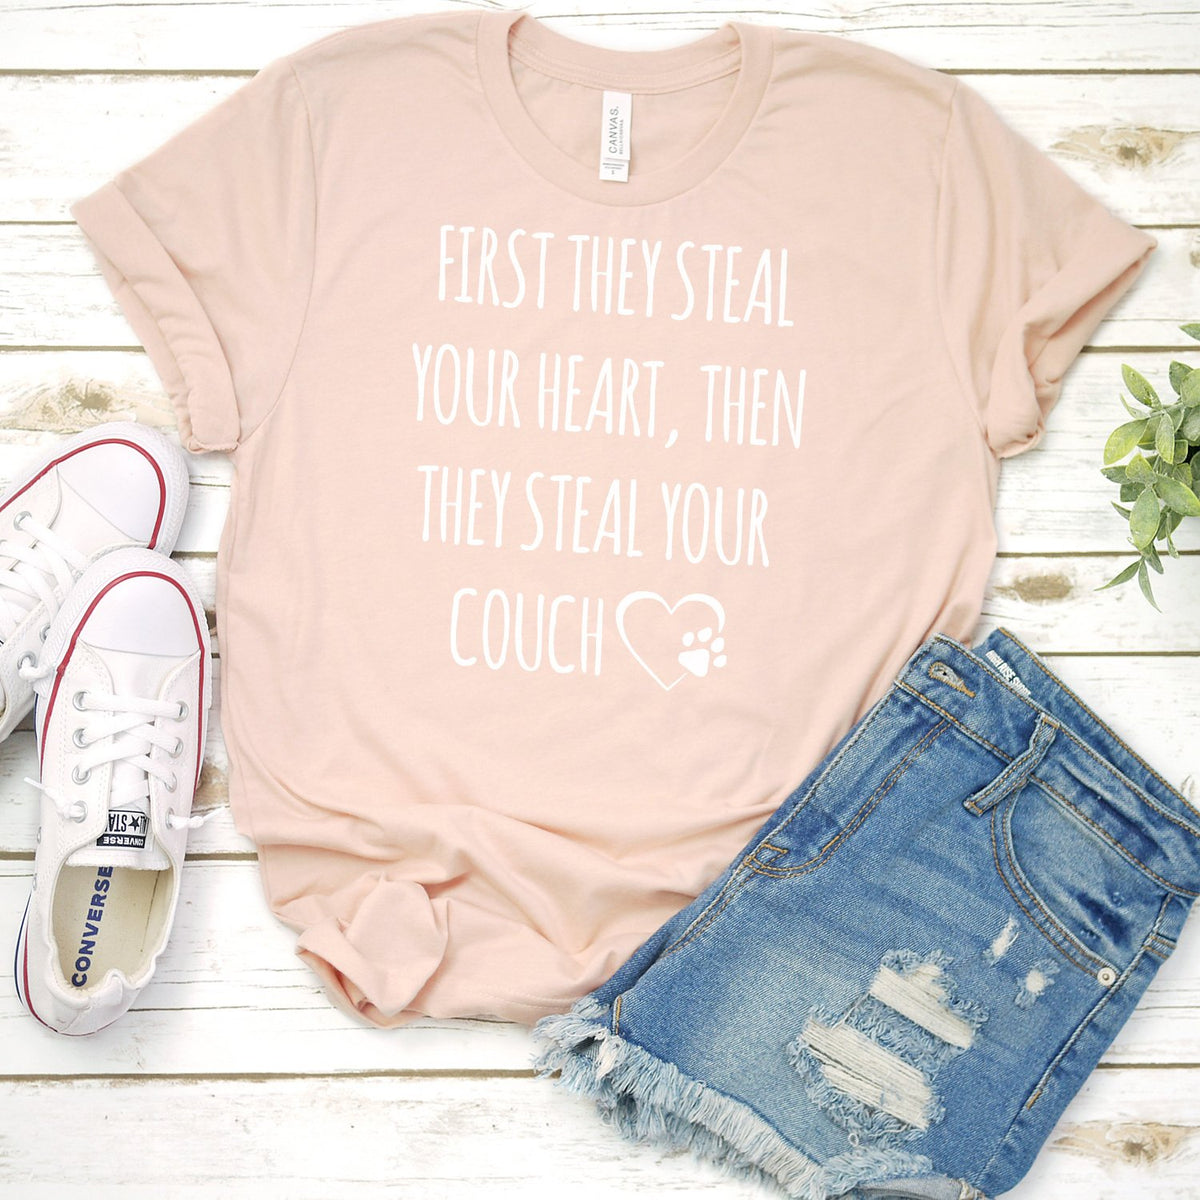 First They Steal Your Heart, Then They Steal Your Couch - Short Sleeve Tee Shirt